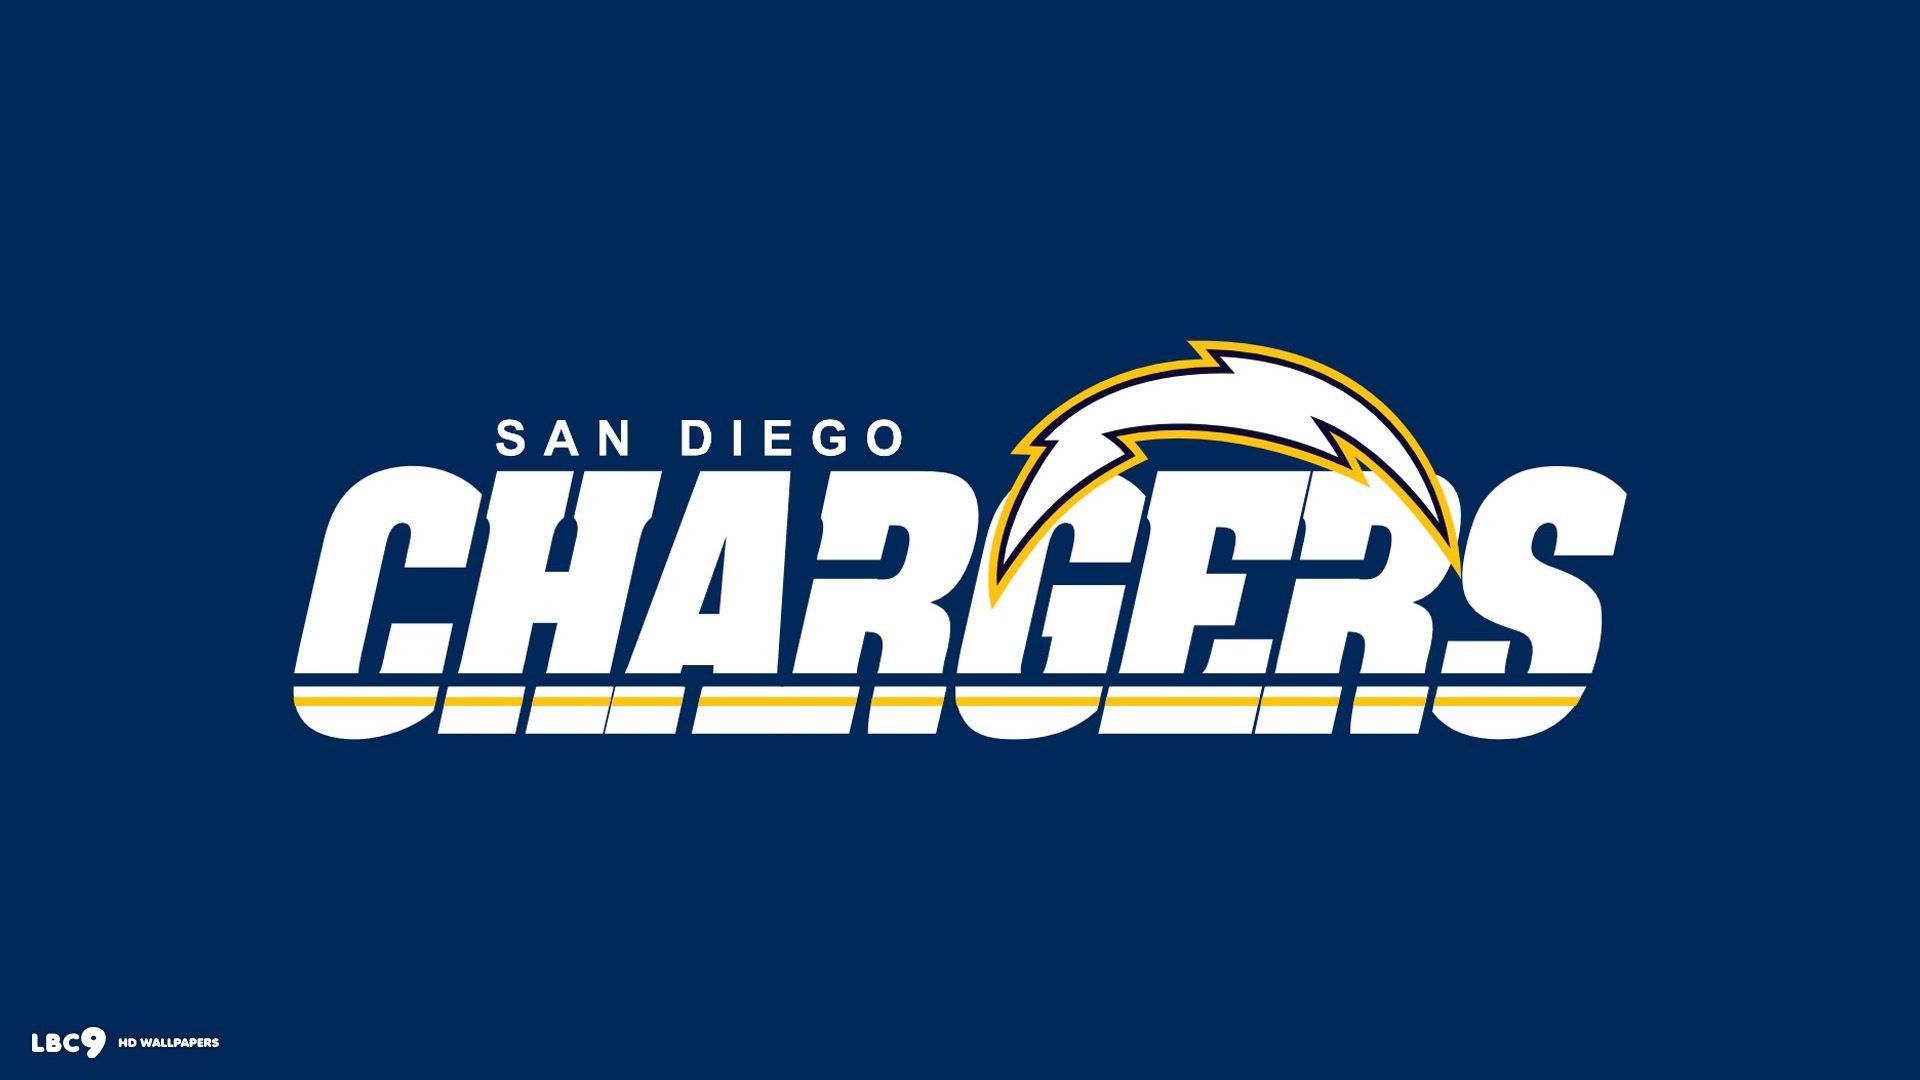 San diego chargers wallpapers